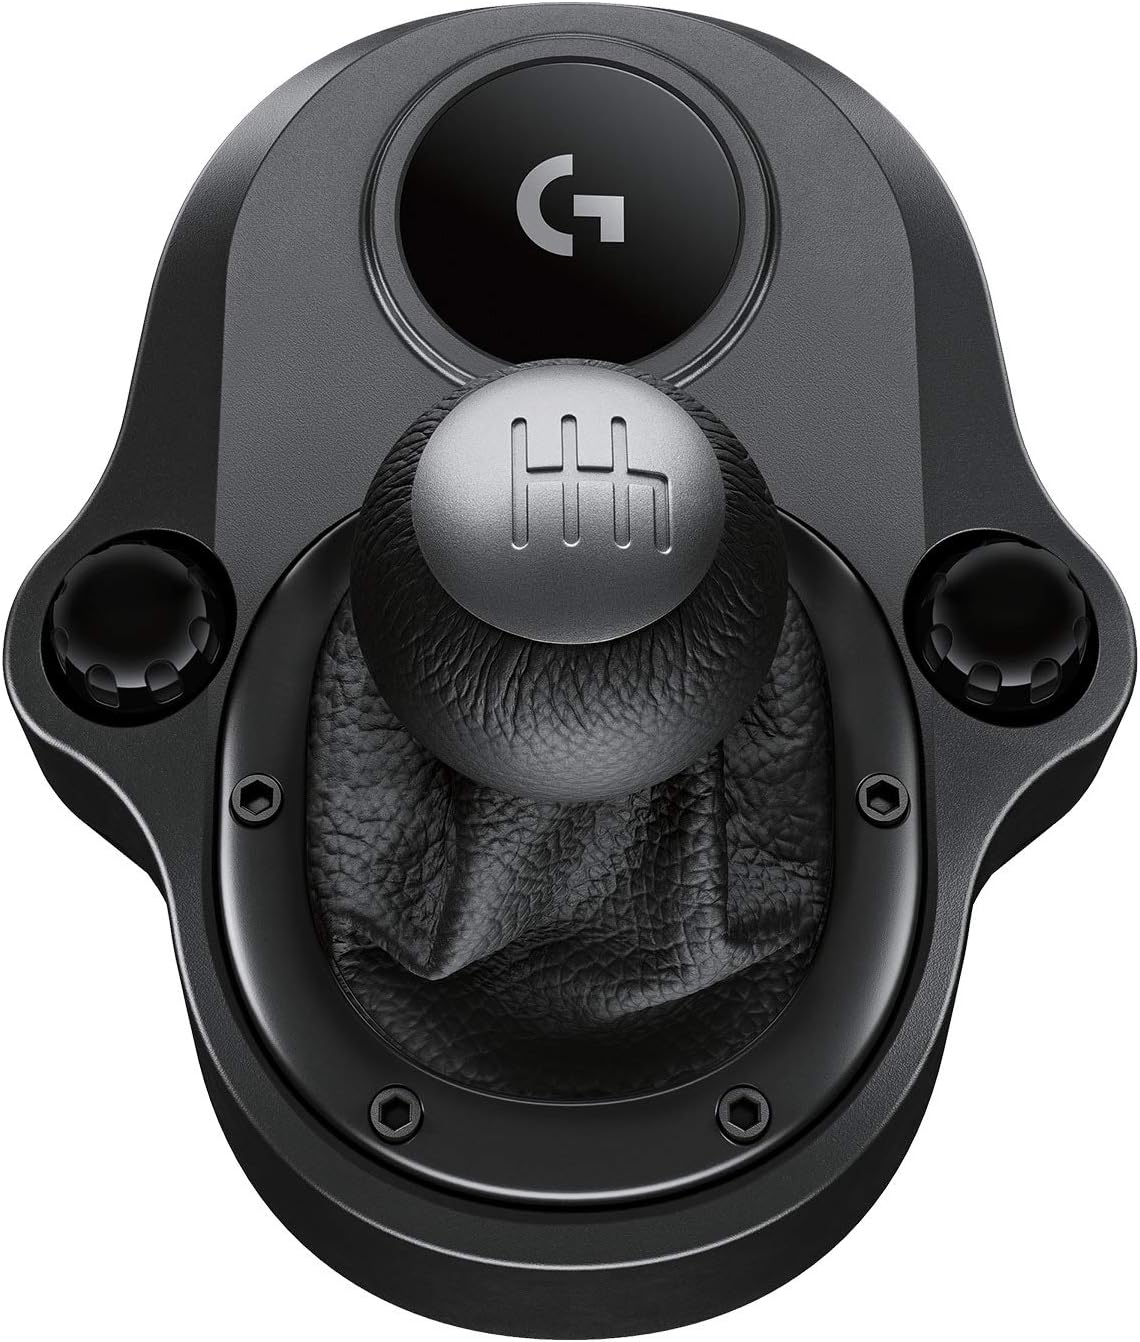 Logitech Driving Force Shifter for G29 &amp; G920 Racing Wheels - Black/Silver (Pre-Owned)